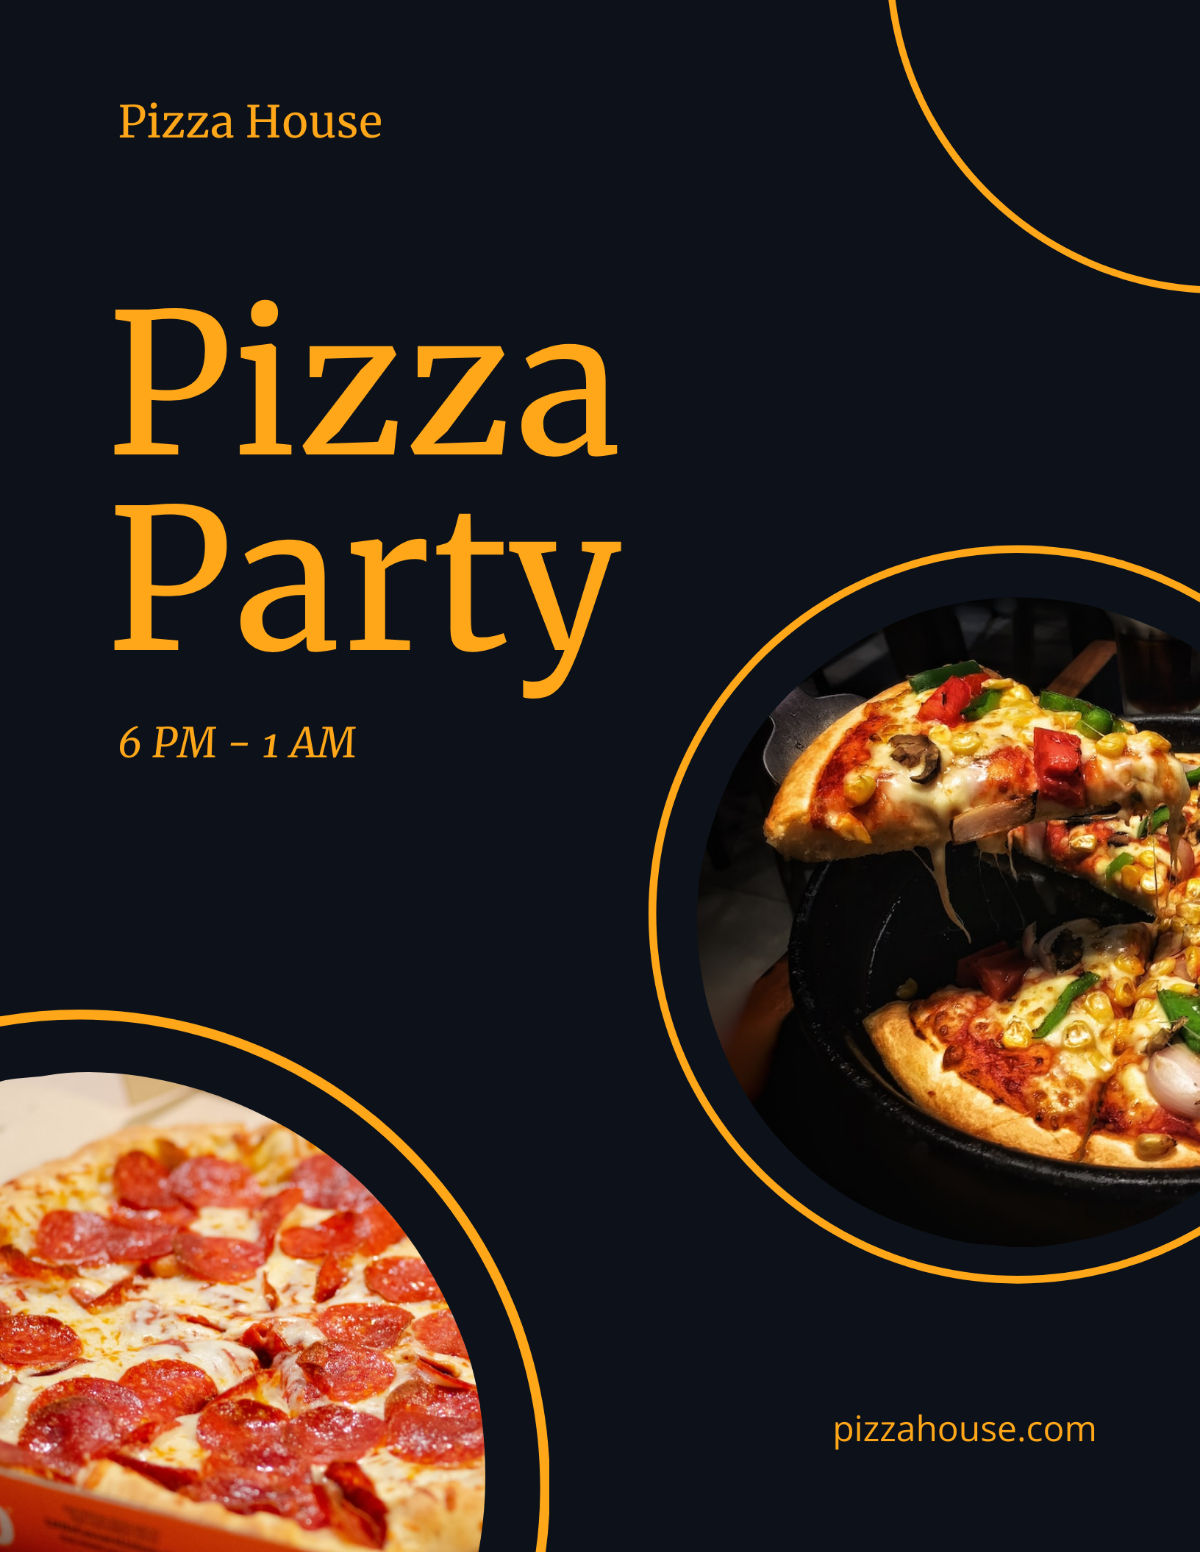 Pizza Party Flyer Template